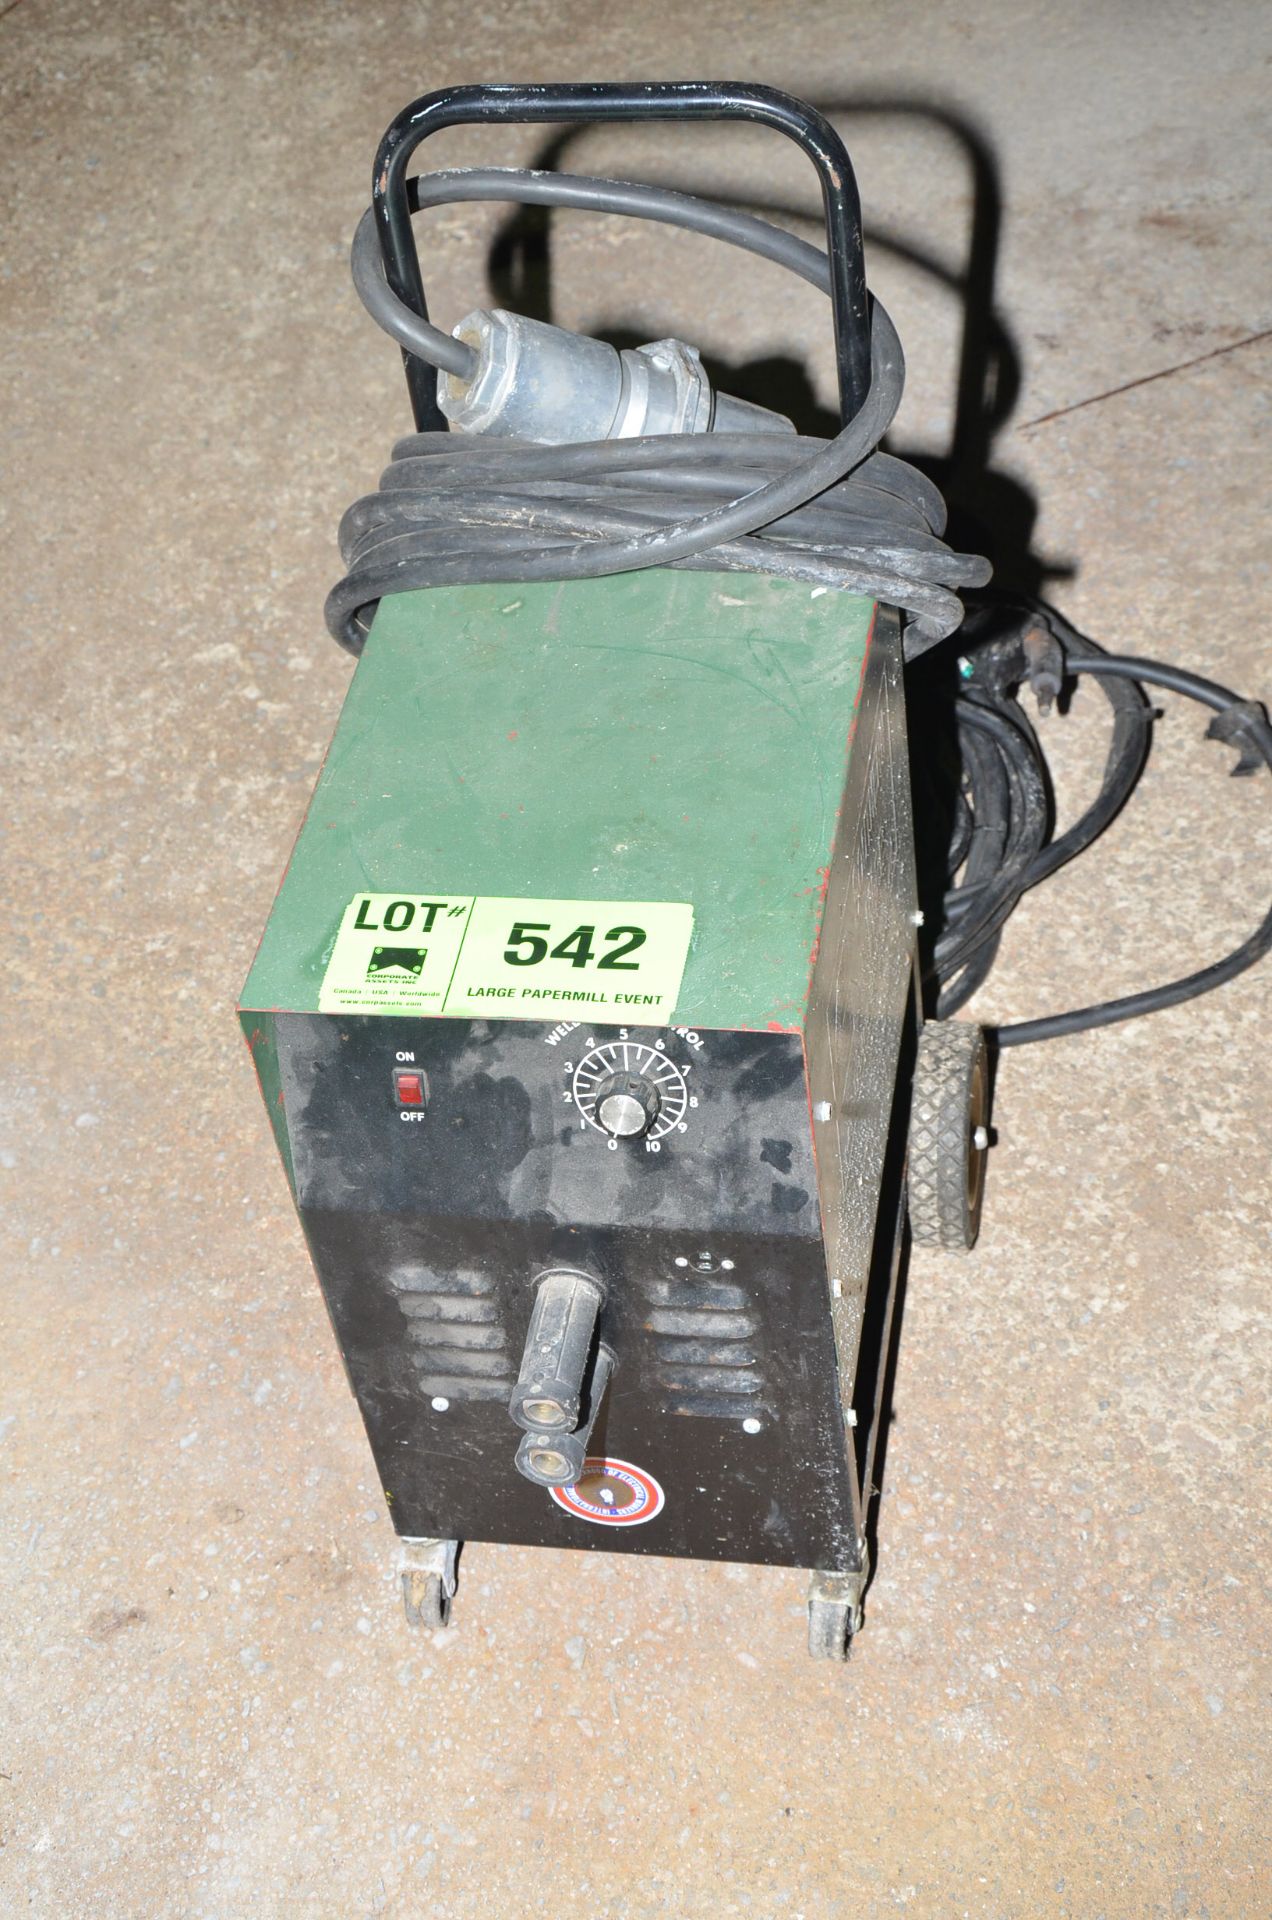 ABW PORTABLE SPOT WELDER WITH CABLES AND GUN, S/N ABW-1 [RIGGING FEES FOR LOT #542 - $85 USD PLUS